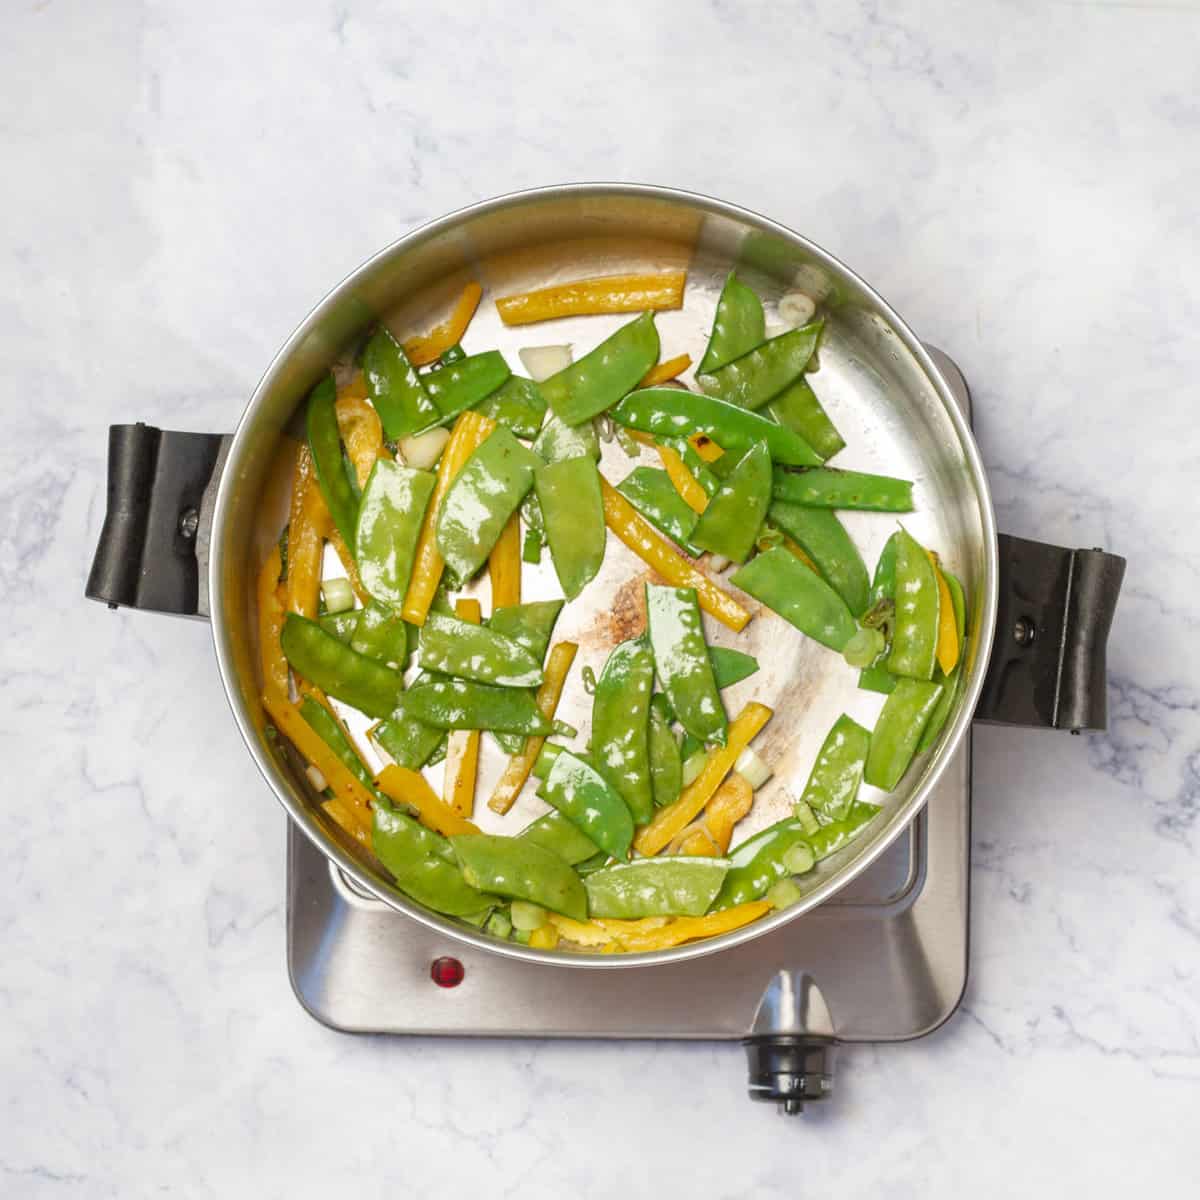 carrots, green onions and yellow bell pepper; stir-fry in a skillet